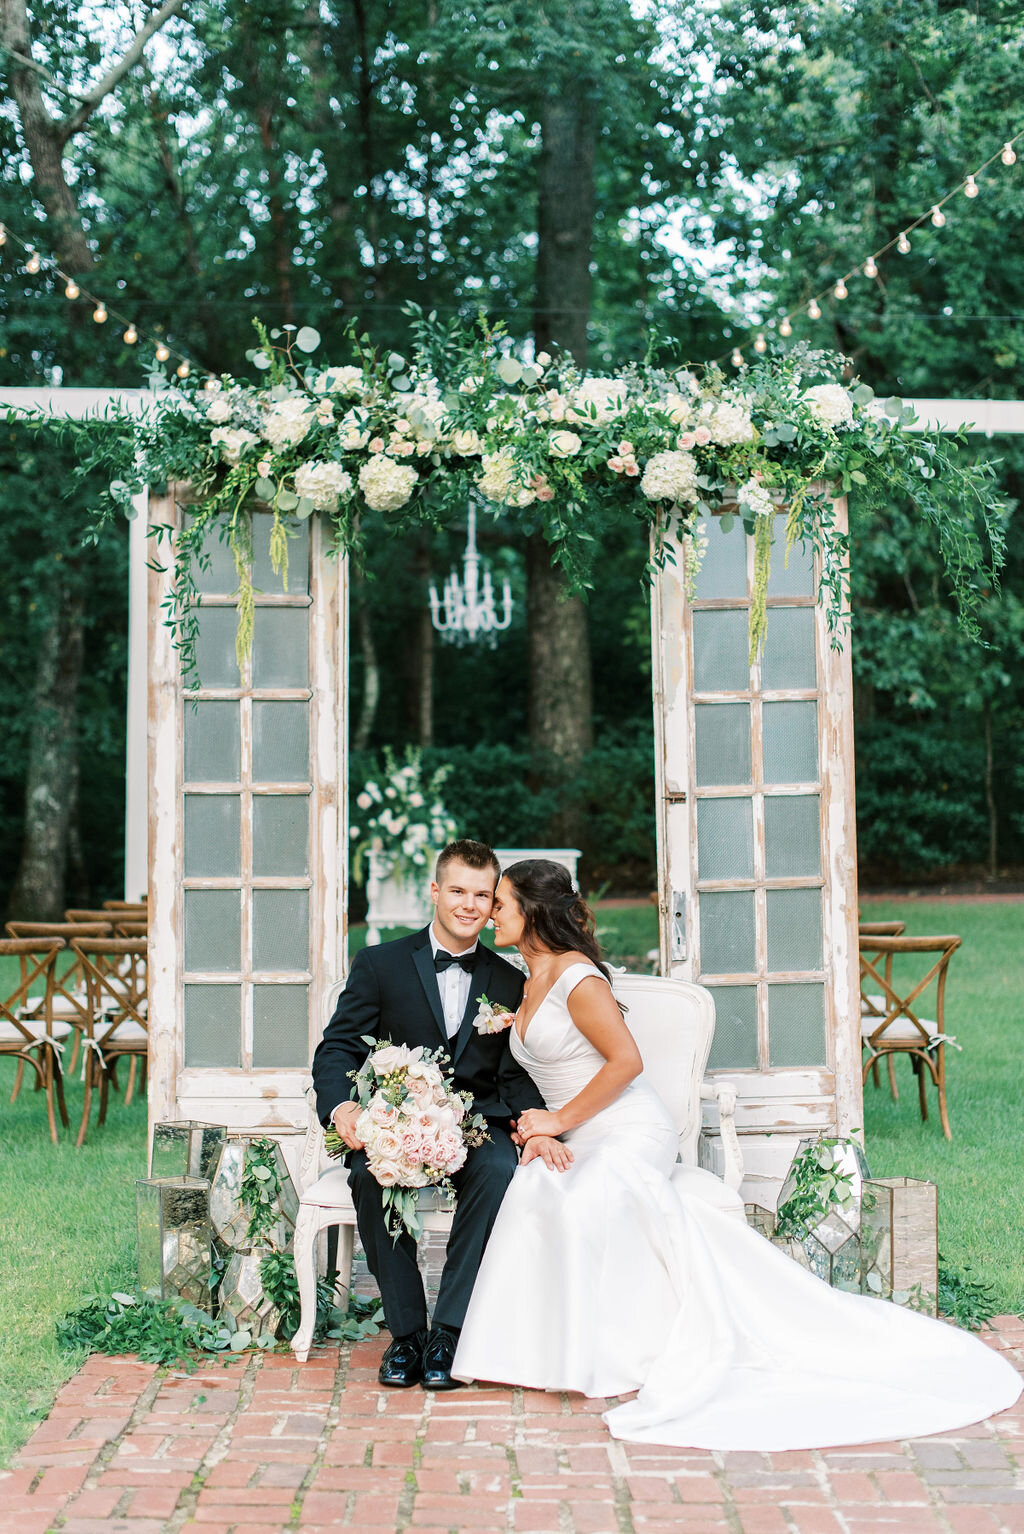 The Wheeler House was the backdrop for stunning beauty…